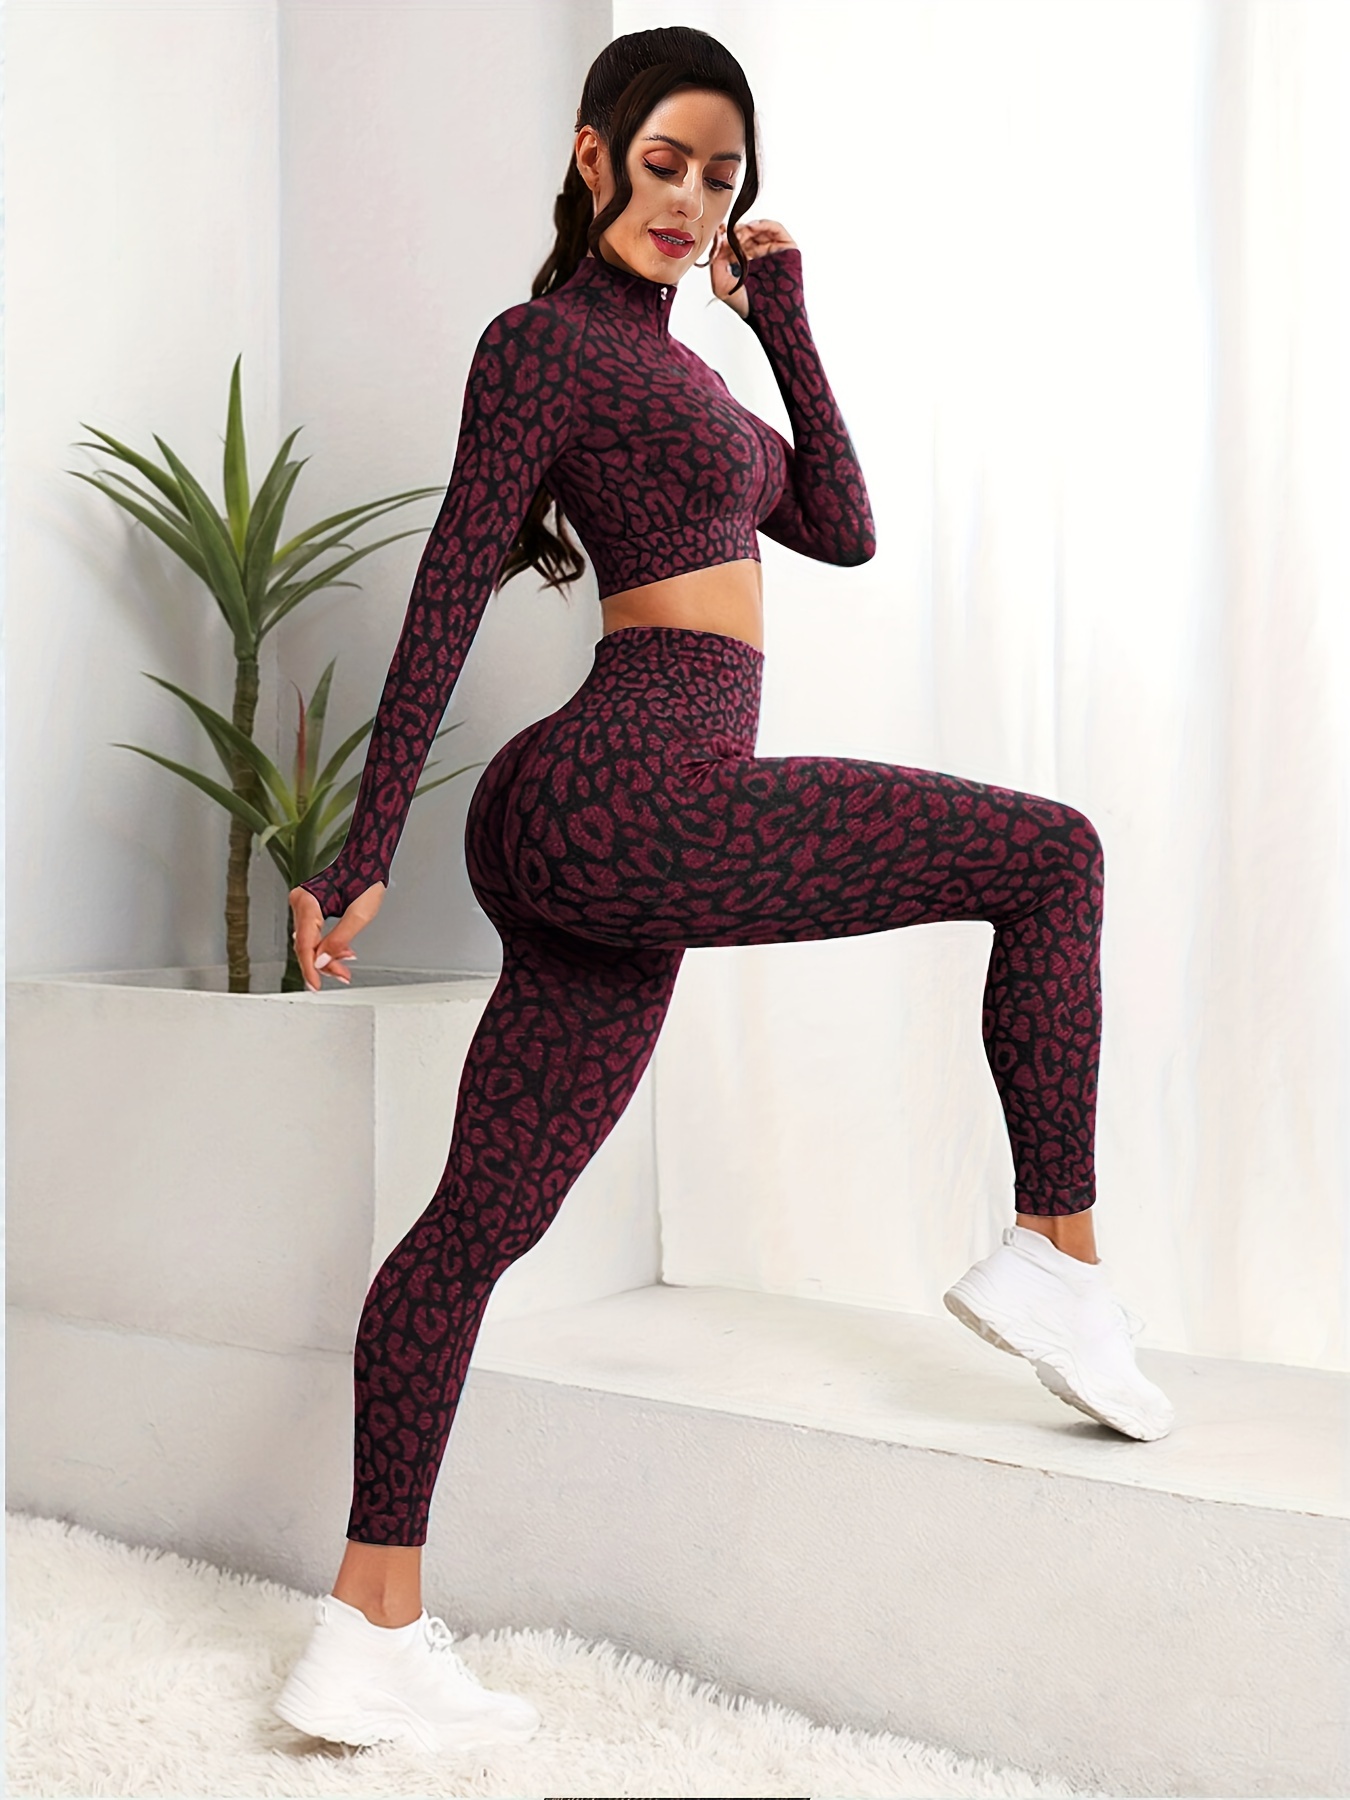 Juicy Couture Workout Athletic Wear Leopard Print Cropped Leggings Small